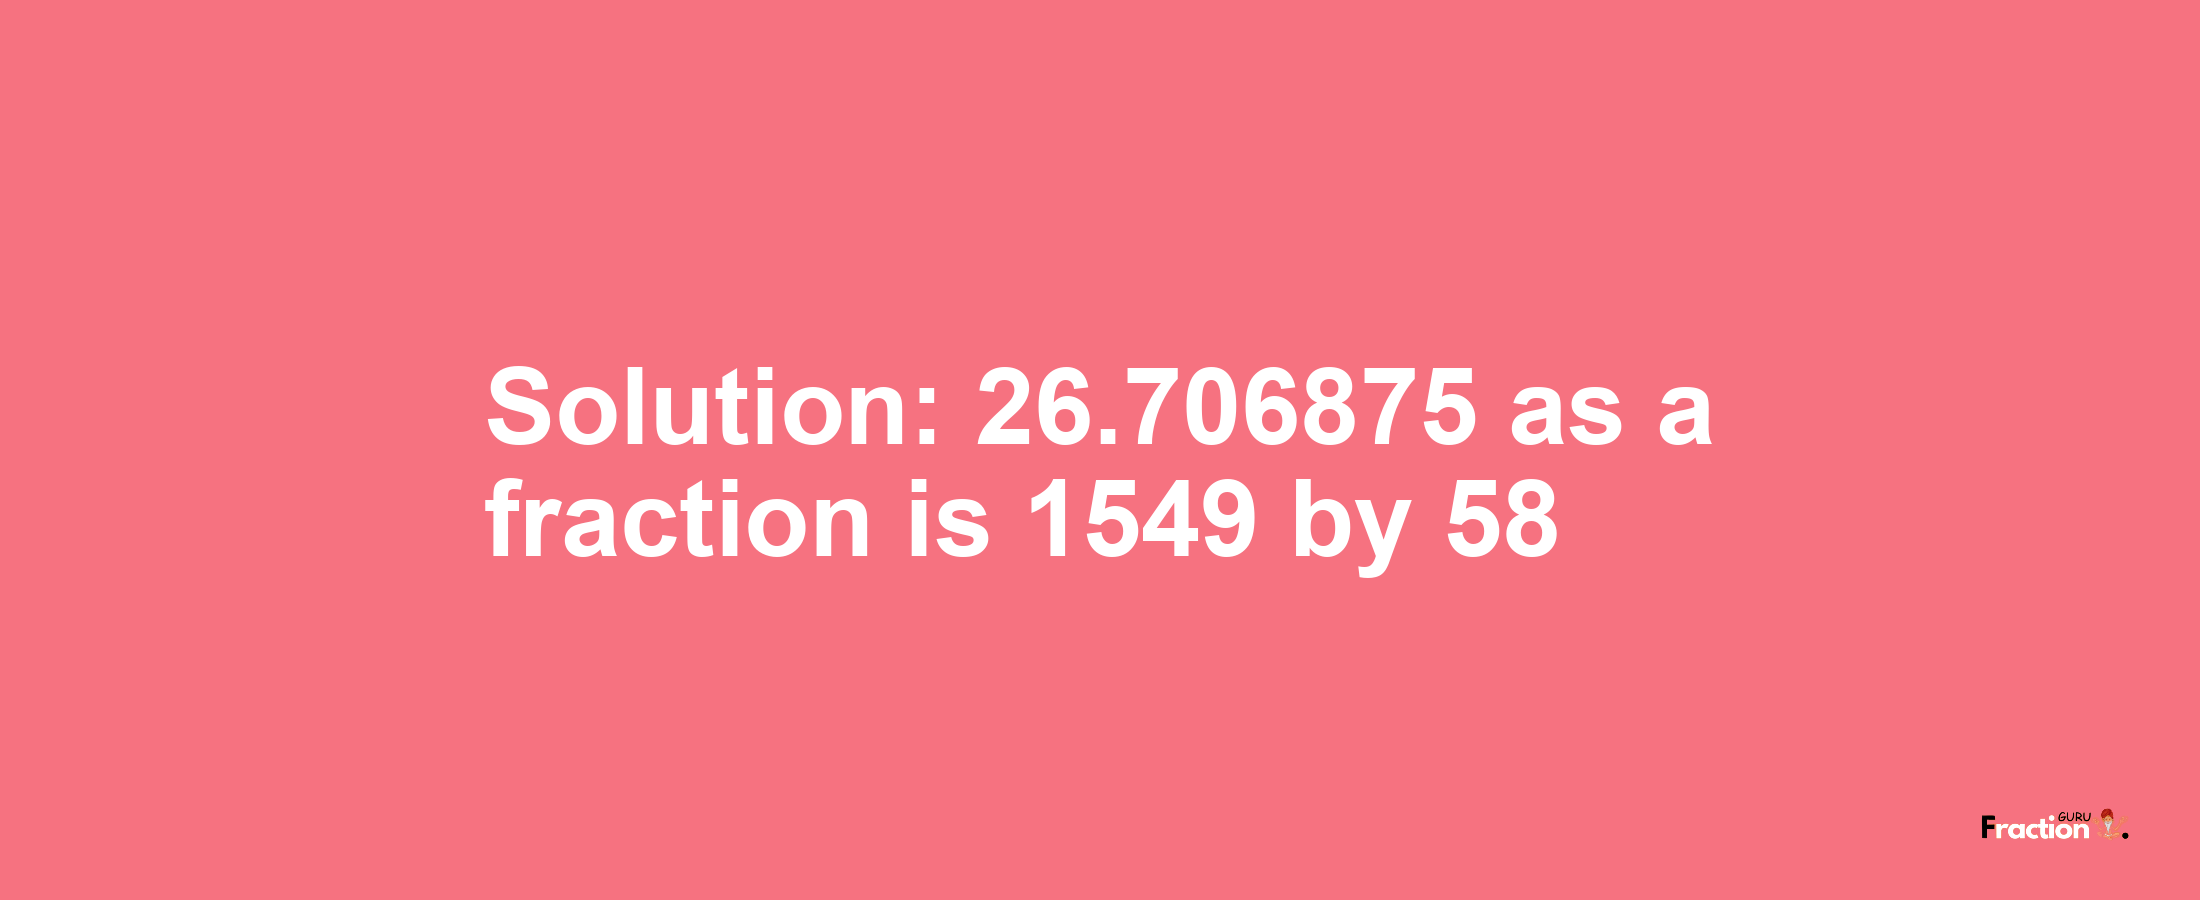 Solution:26.706875 as a fraction is 1549/58